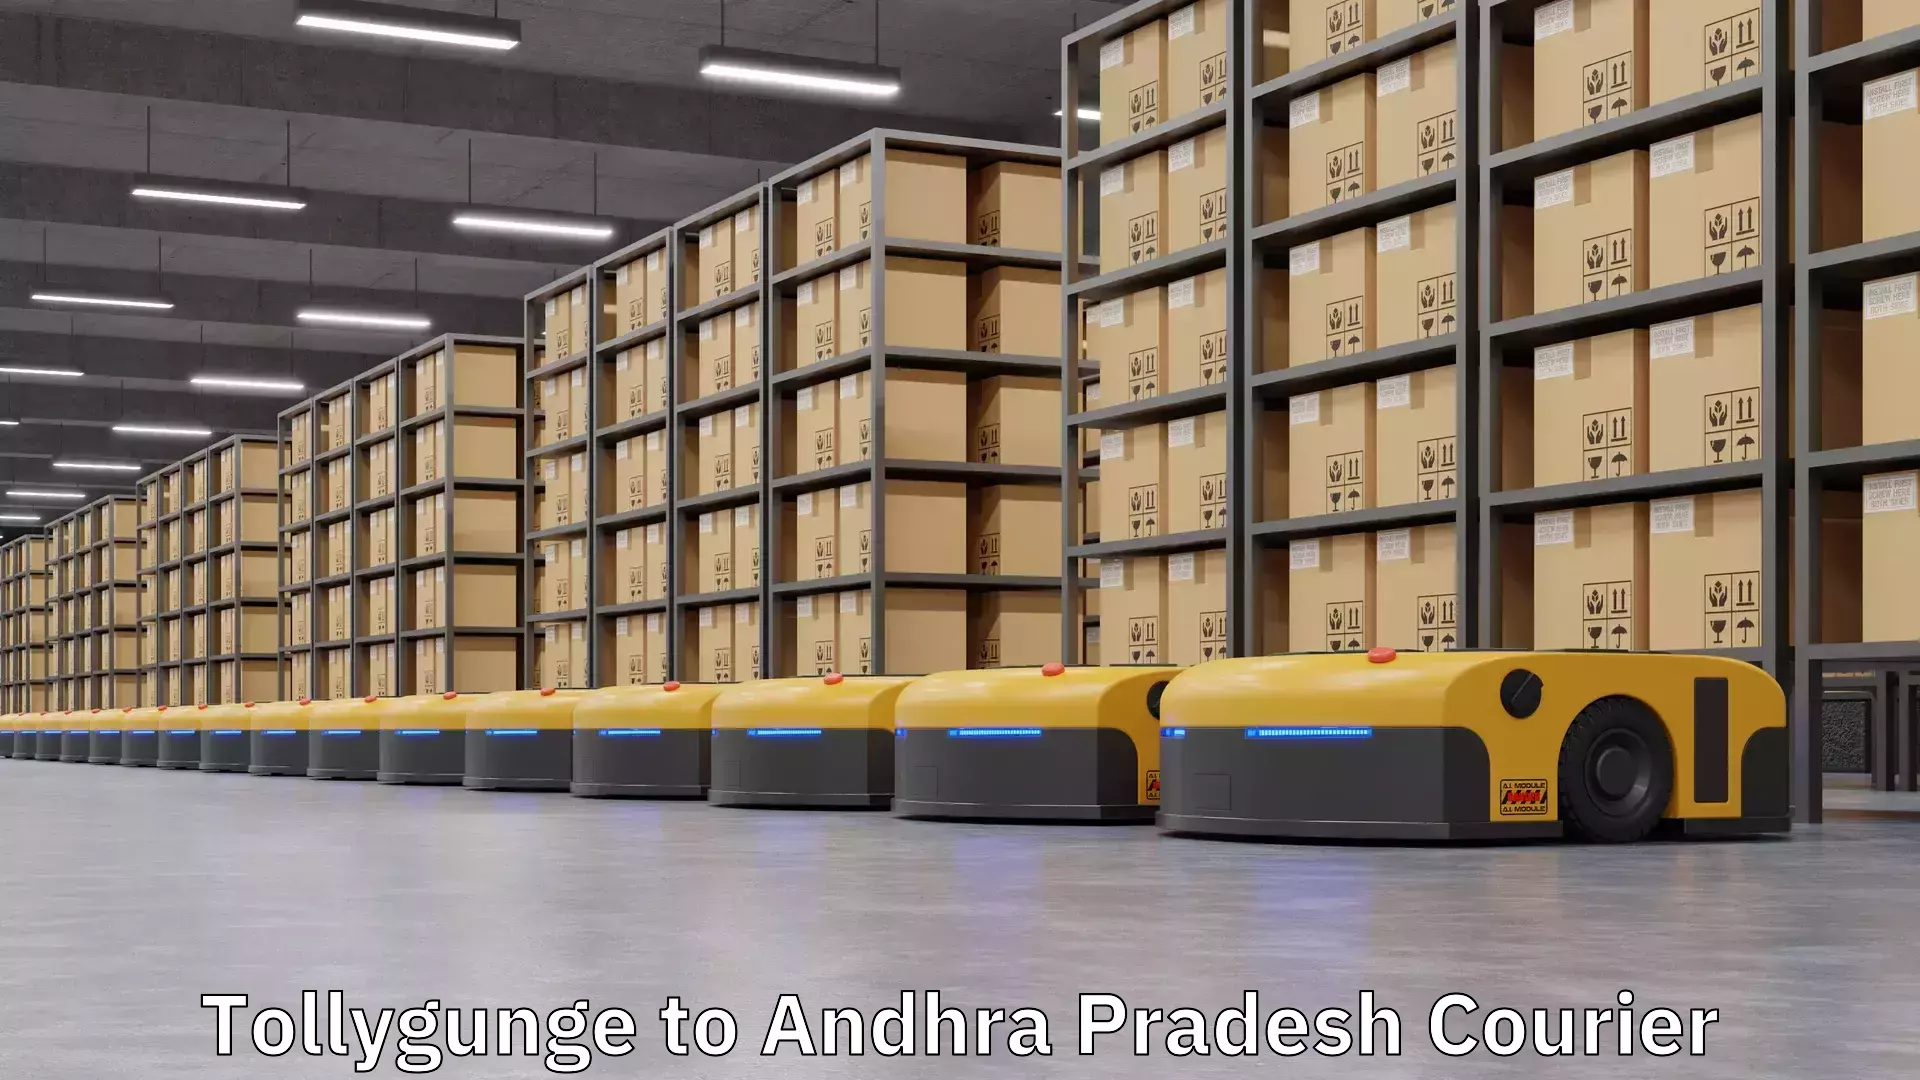 24-hour courier service Tollygunge to Andhra Pradesh